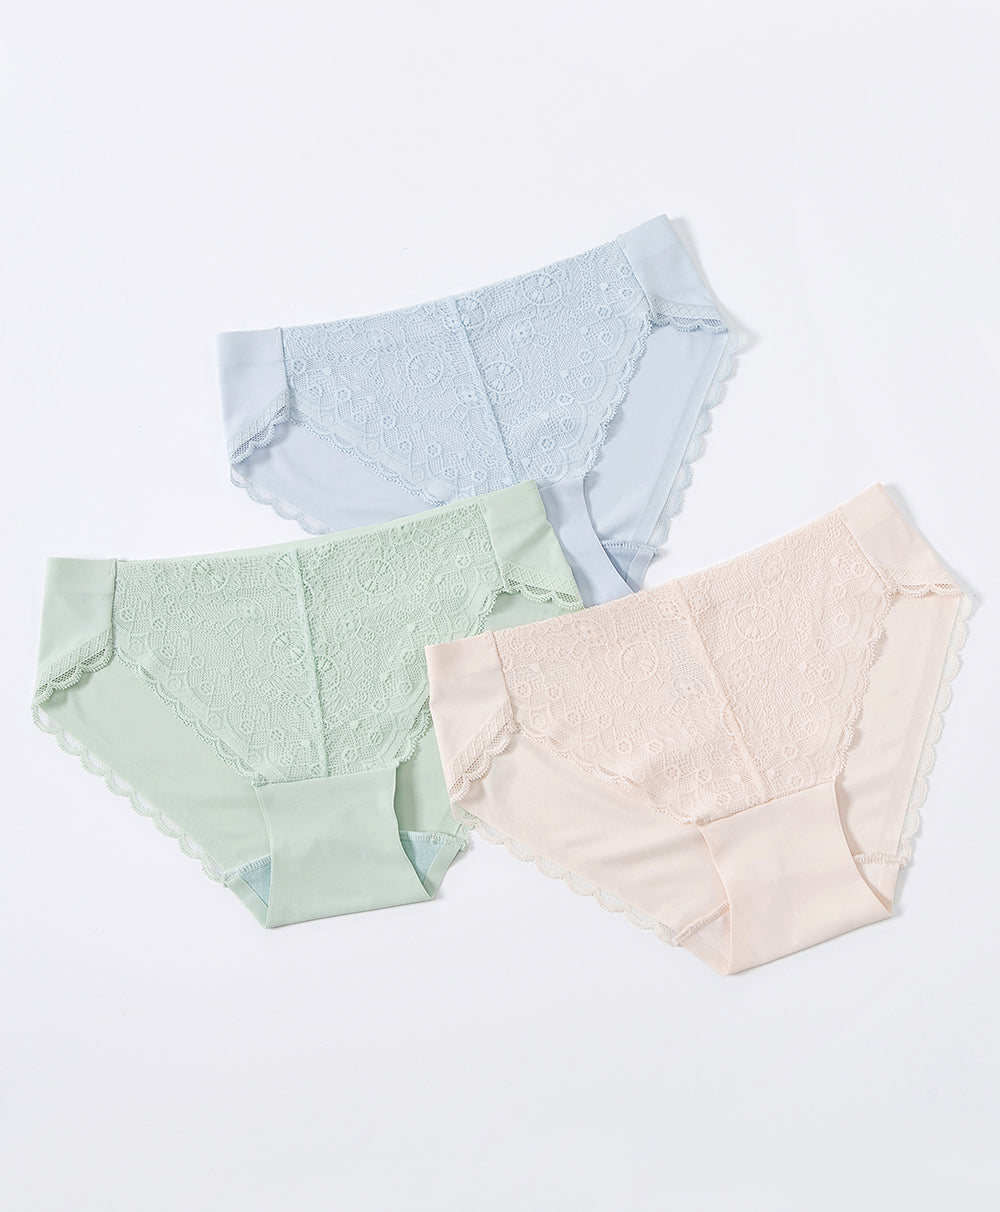 Breezies - Set of 3 Soft Support Lace Brief Panties - Bright